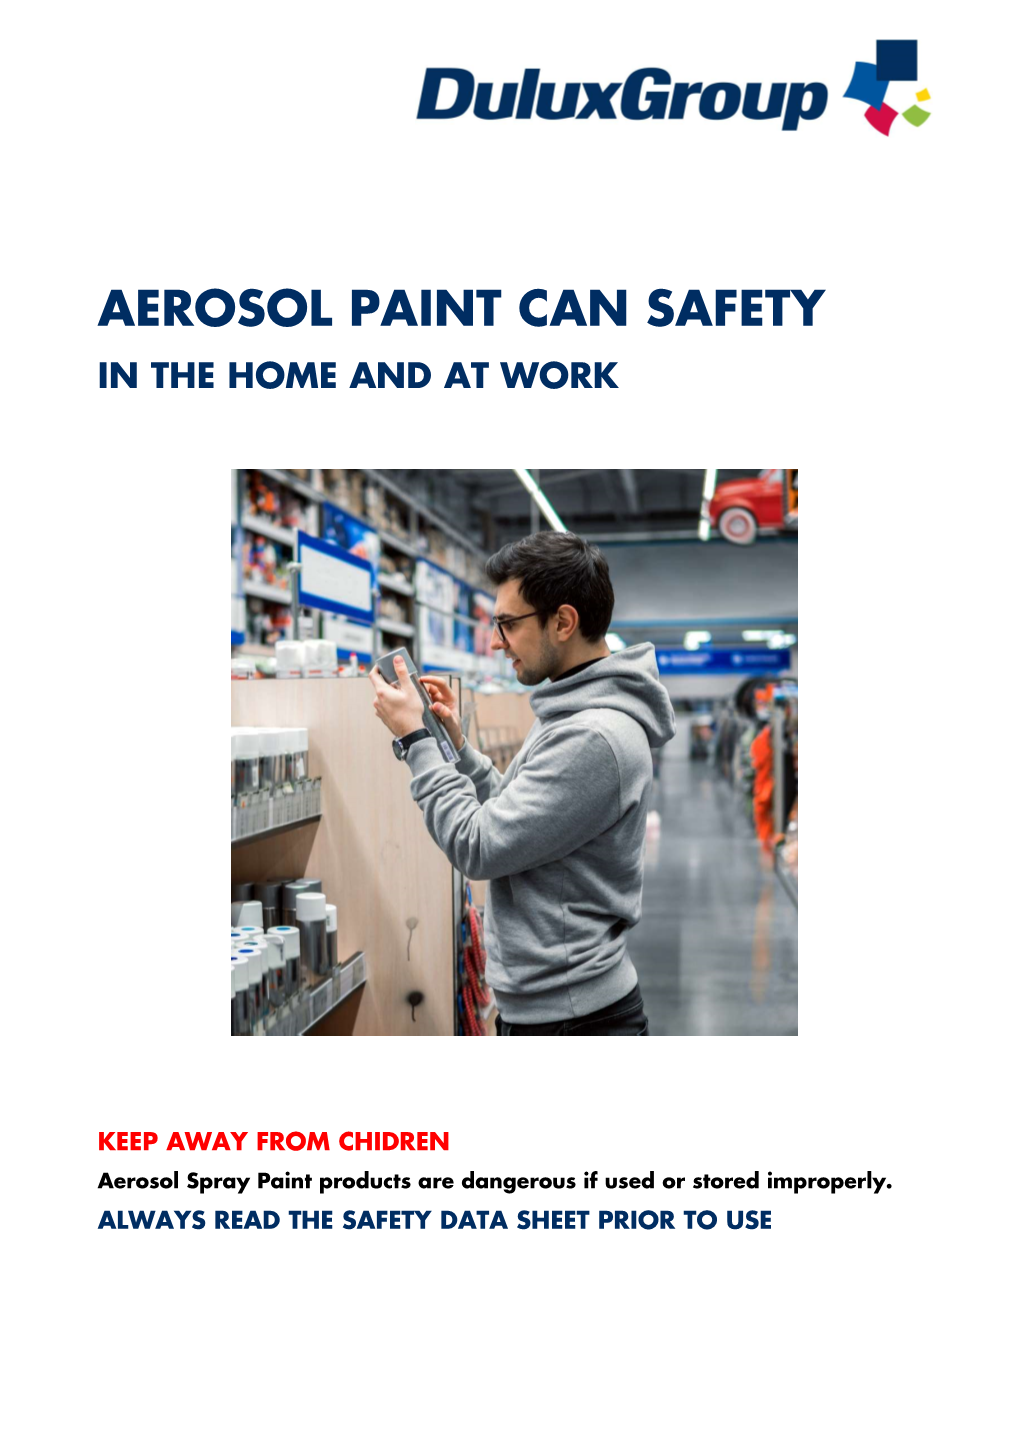 Aerosol Paint Can Safety in the Home and at Work